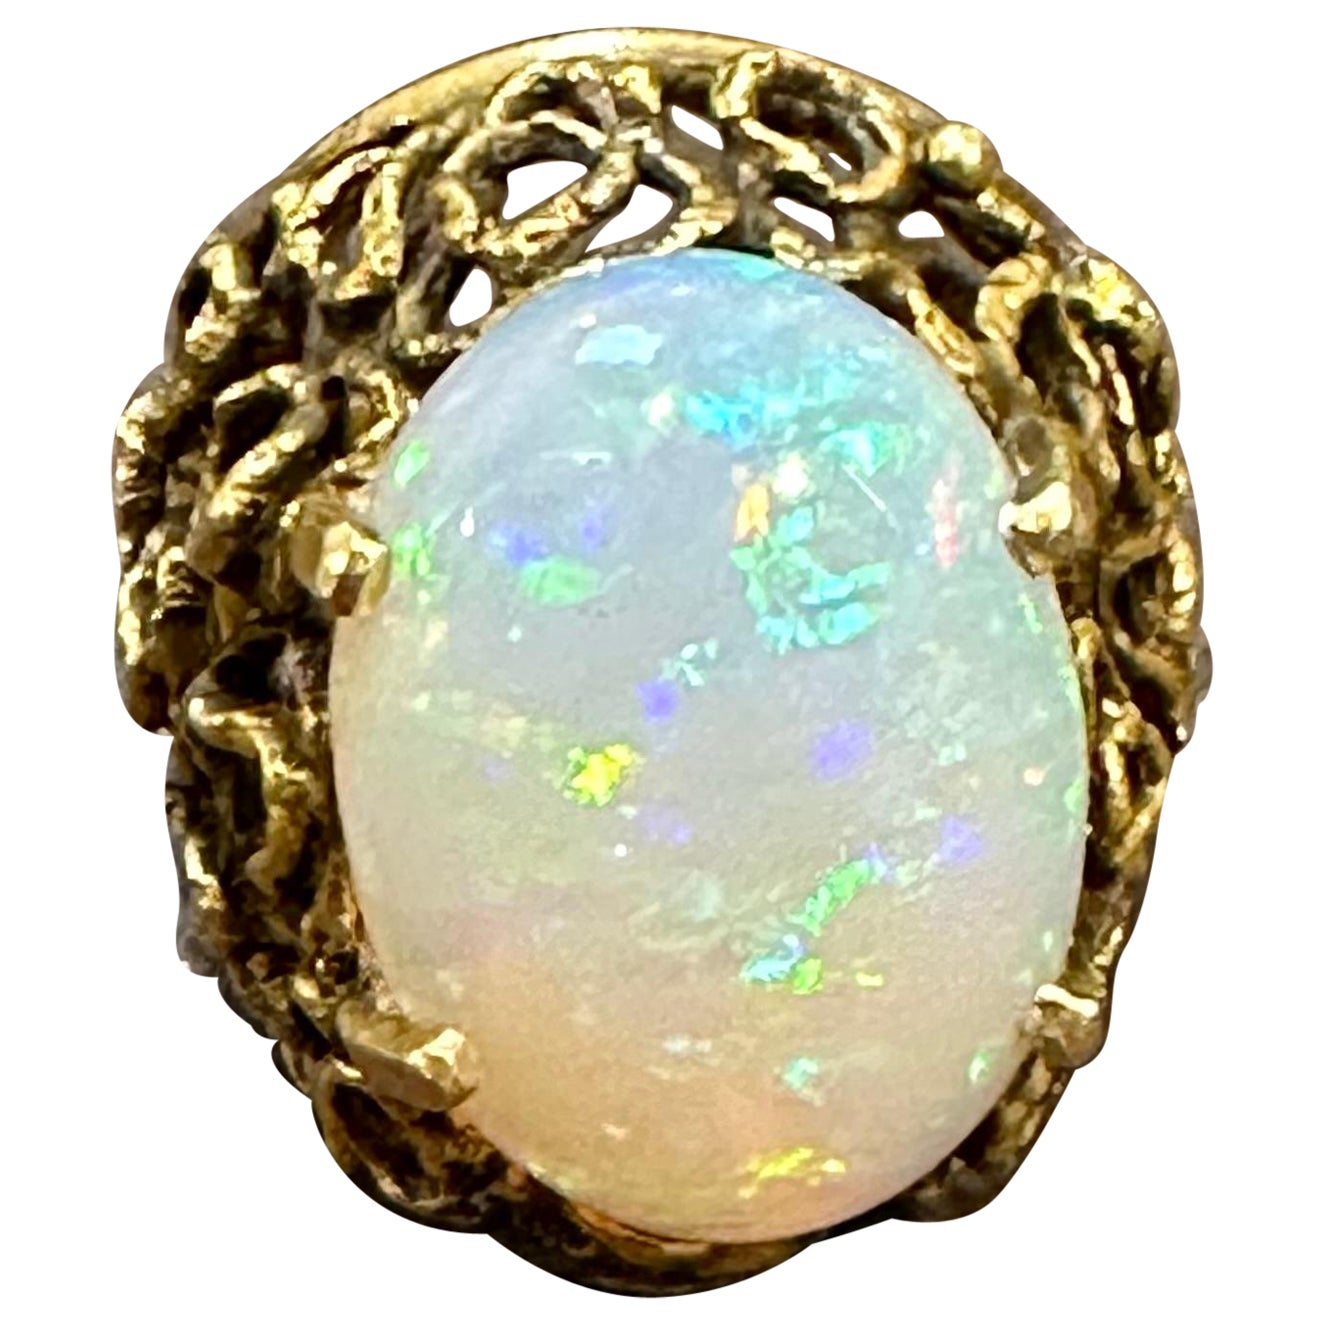 Vintage 11 Carat Oval Shape Ethiopian Opal Cocktail Ring 14kt Yellow Gold Ring